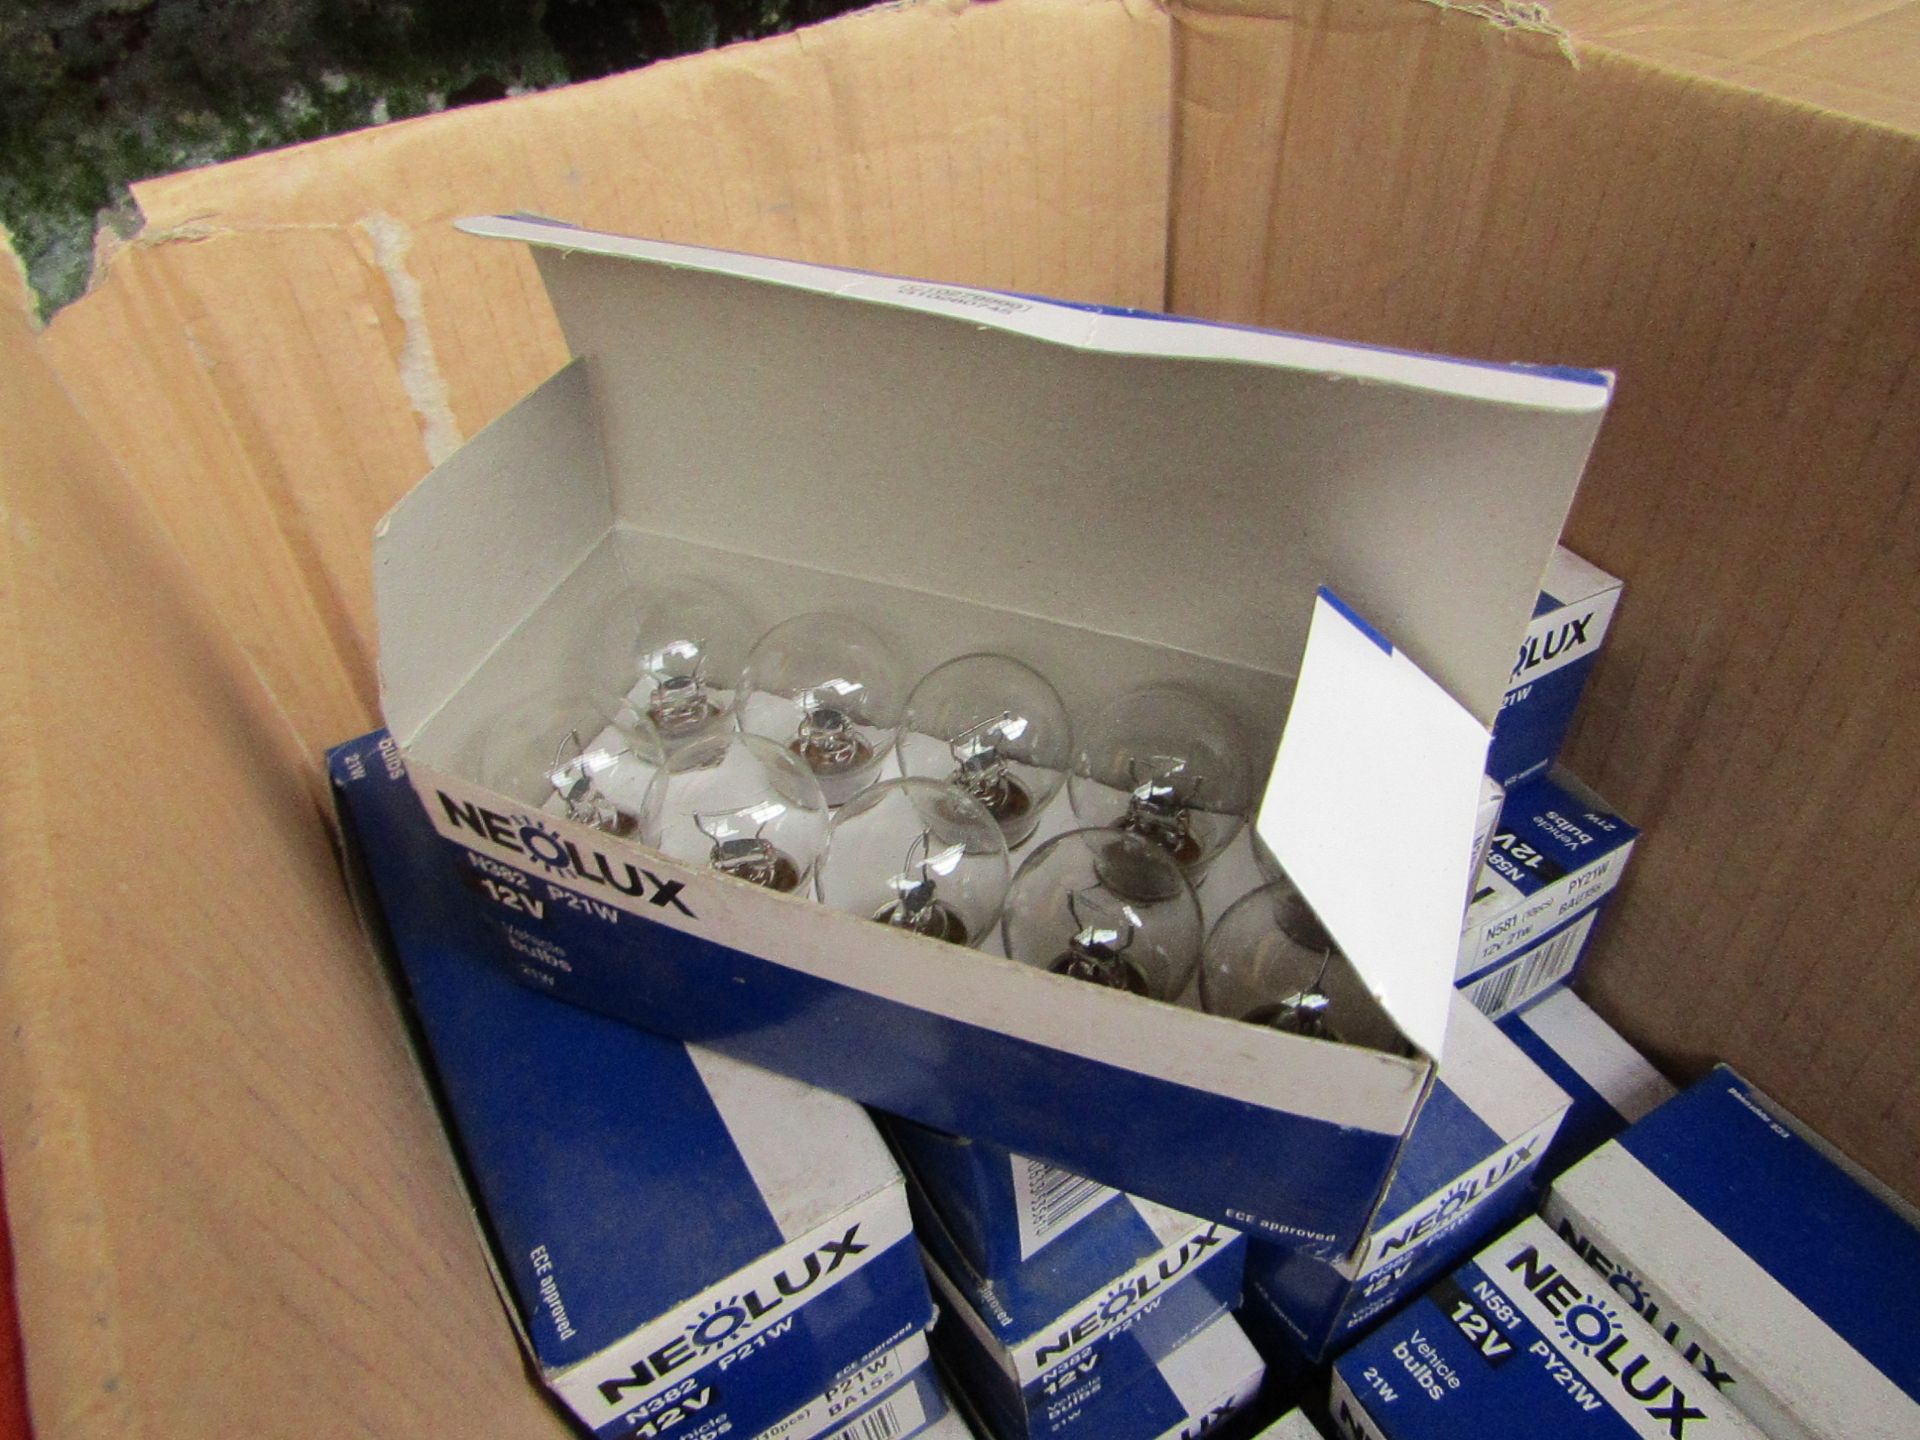 4x Packs of 10 Neolux 12v 21w vehicle bulbs, all new and boxed.